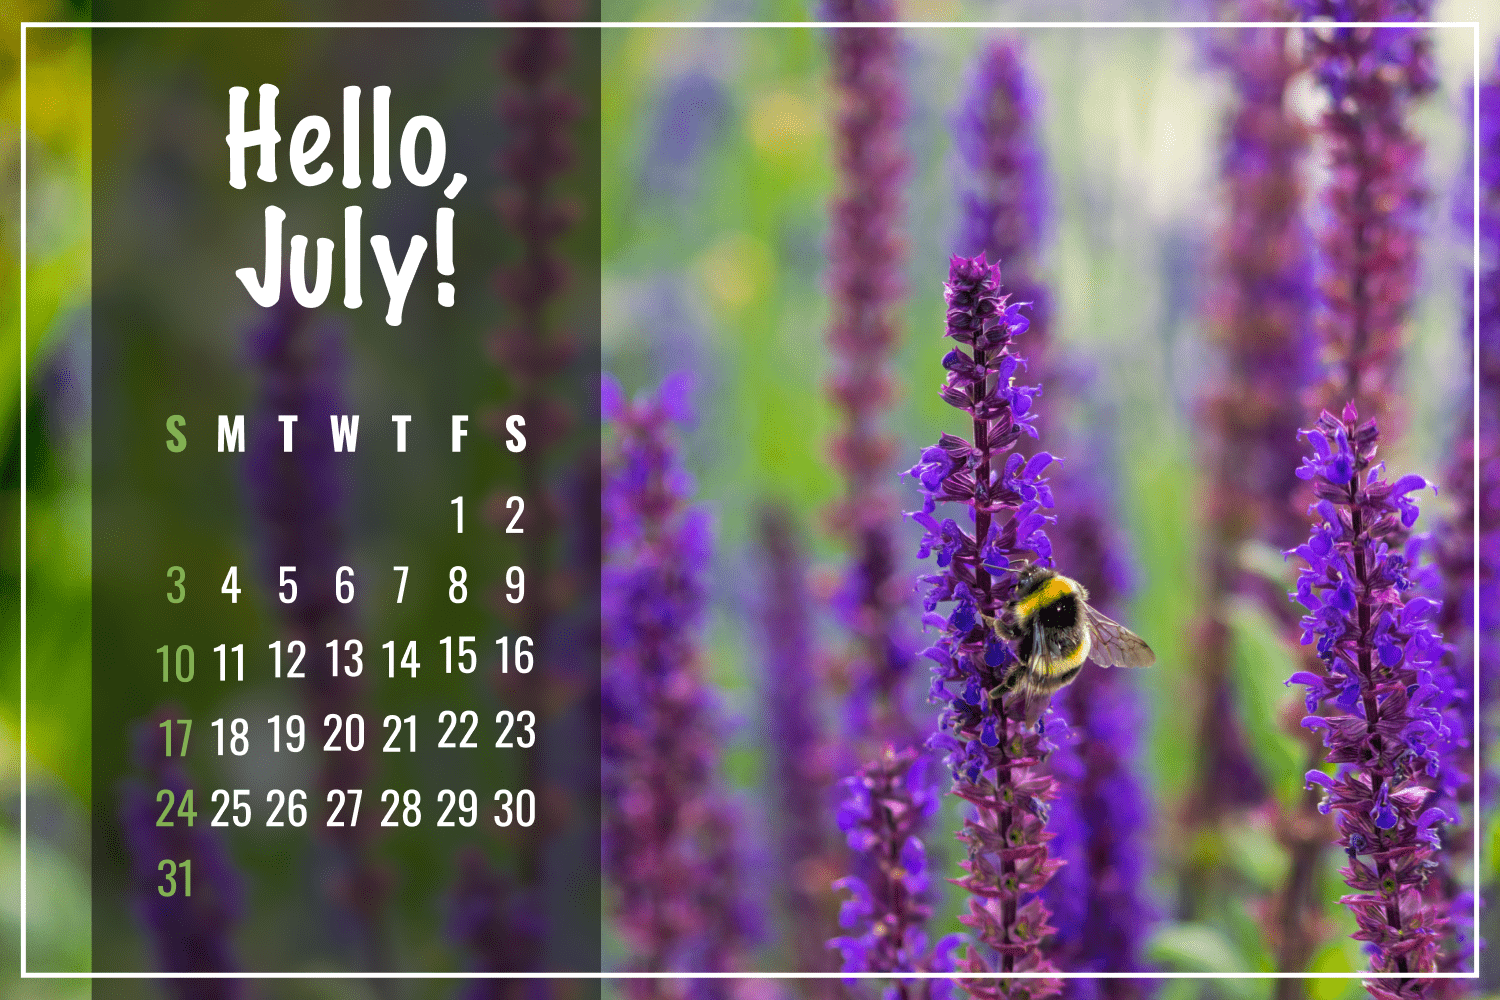 Calendar with purple flowers and a bee on them.